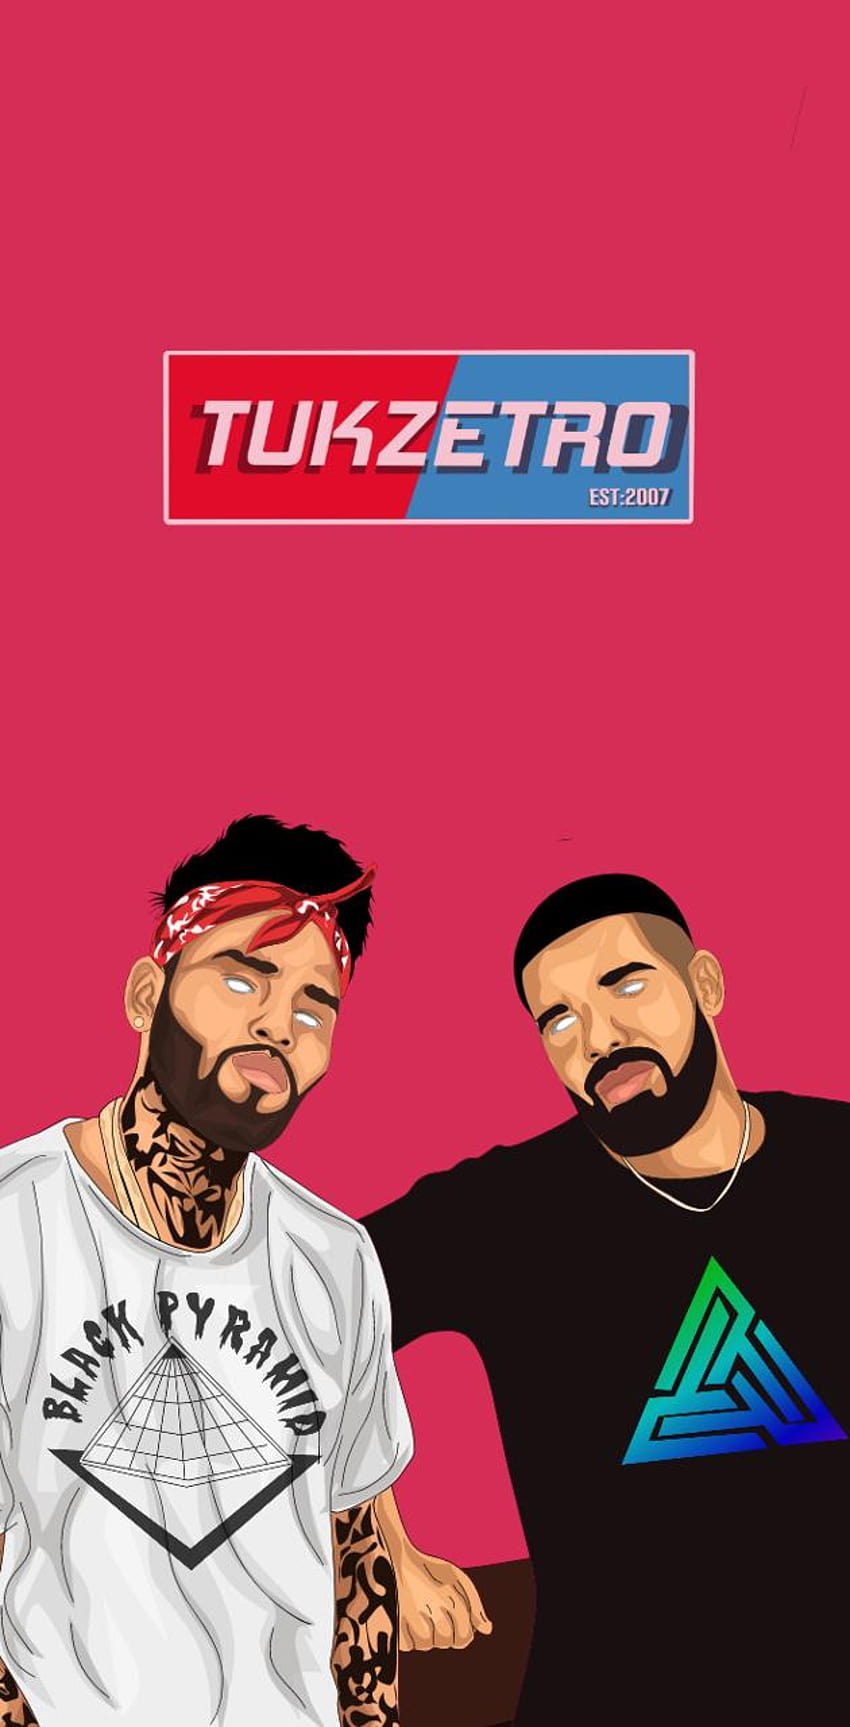 No Guidance by Tukzetro, chris brown and drake HD phone wallpaper